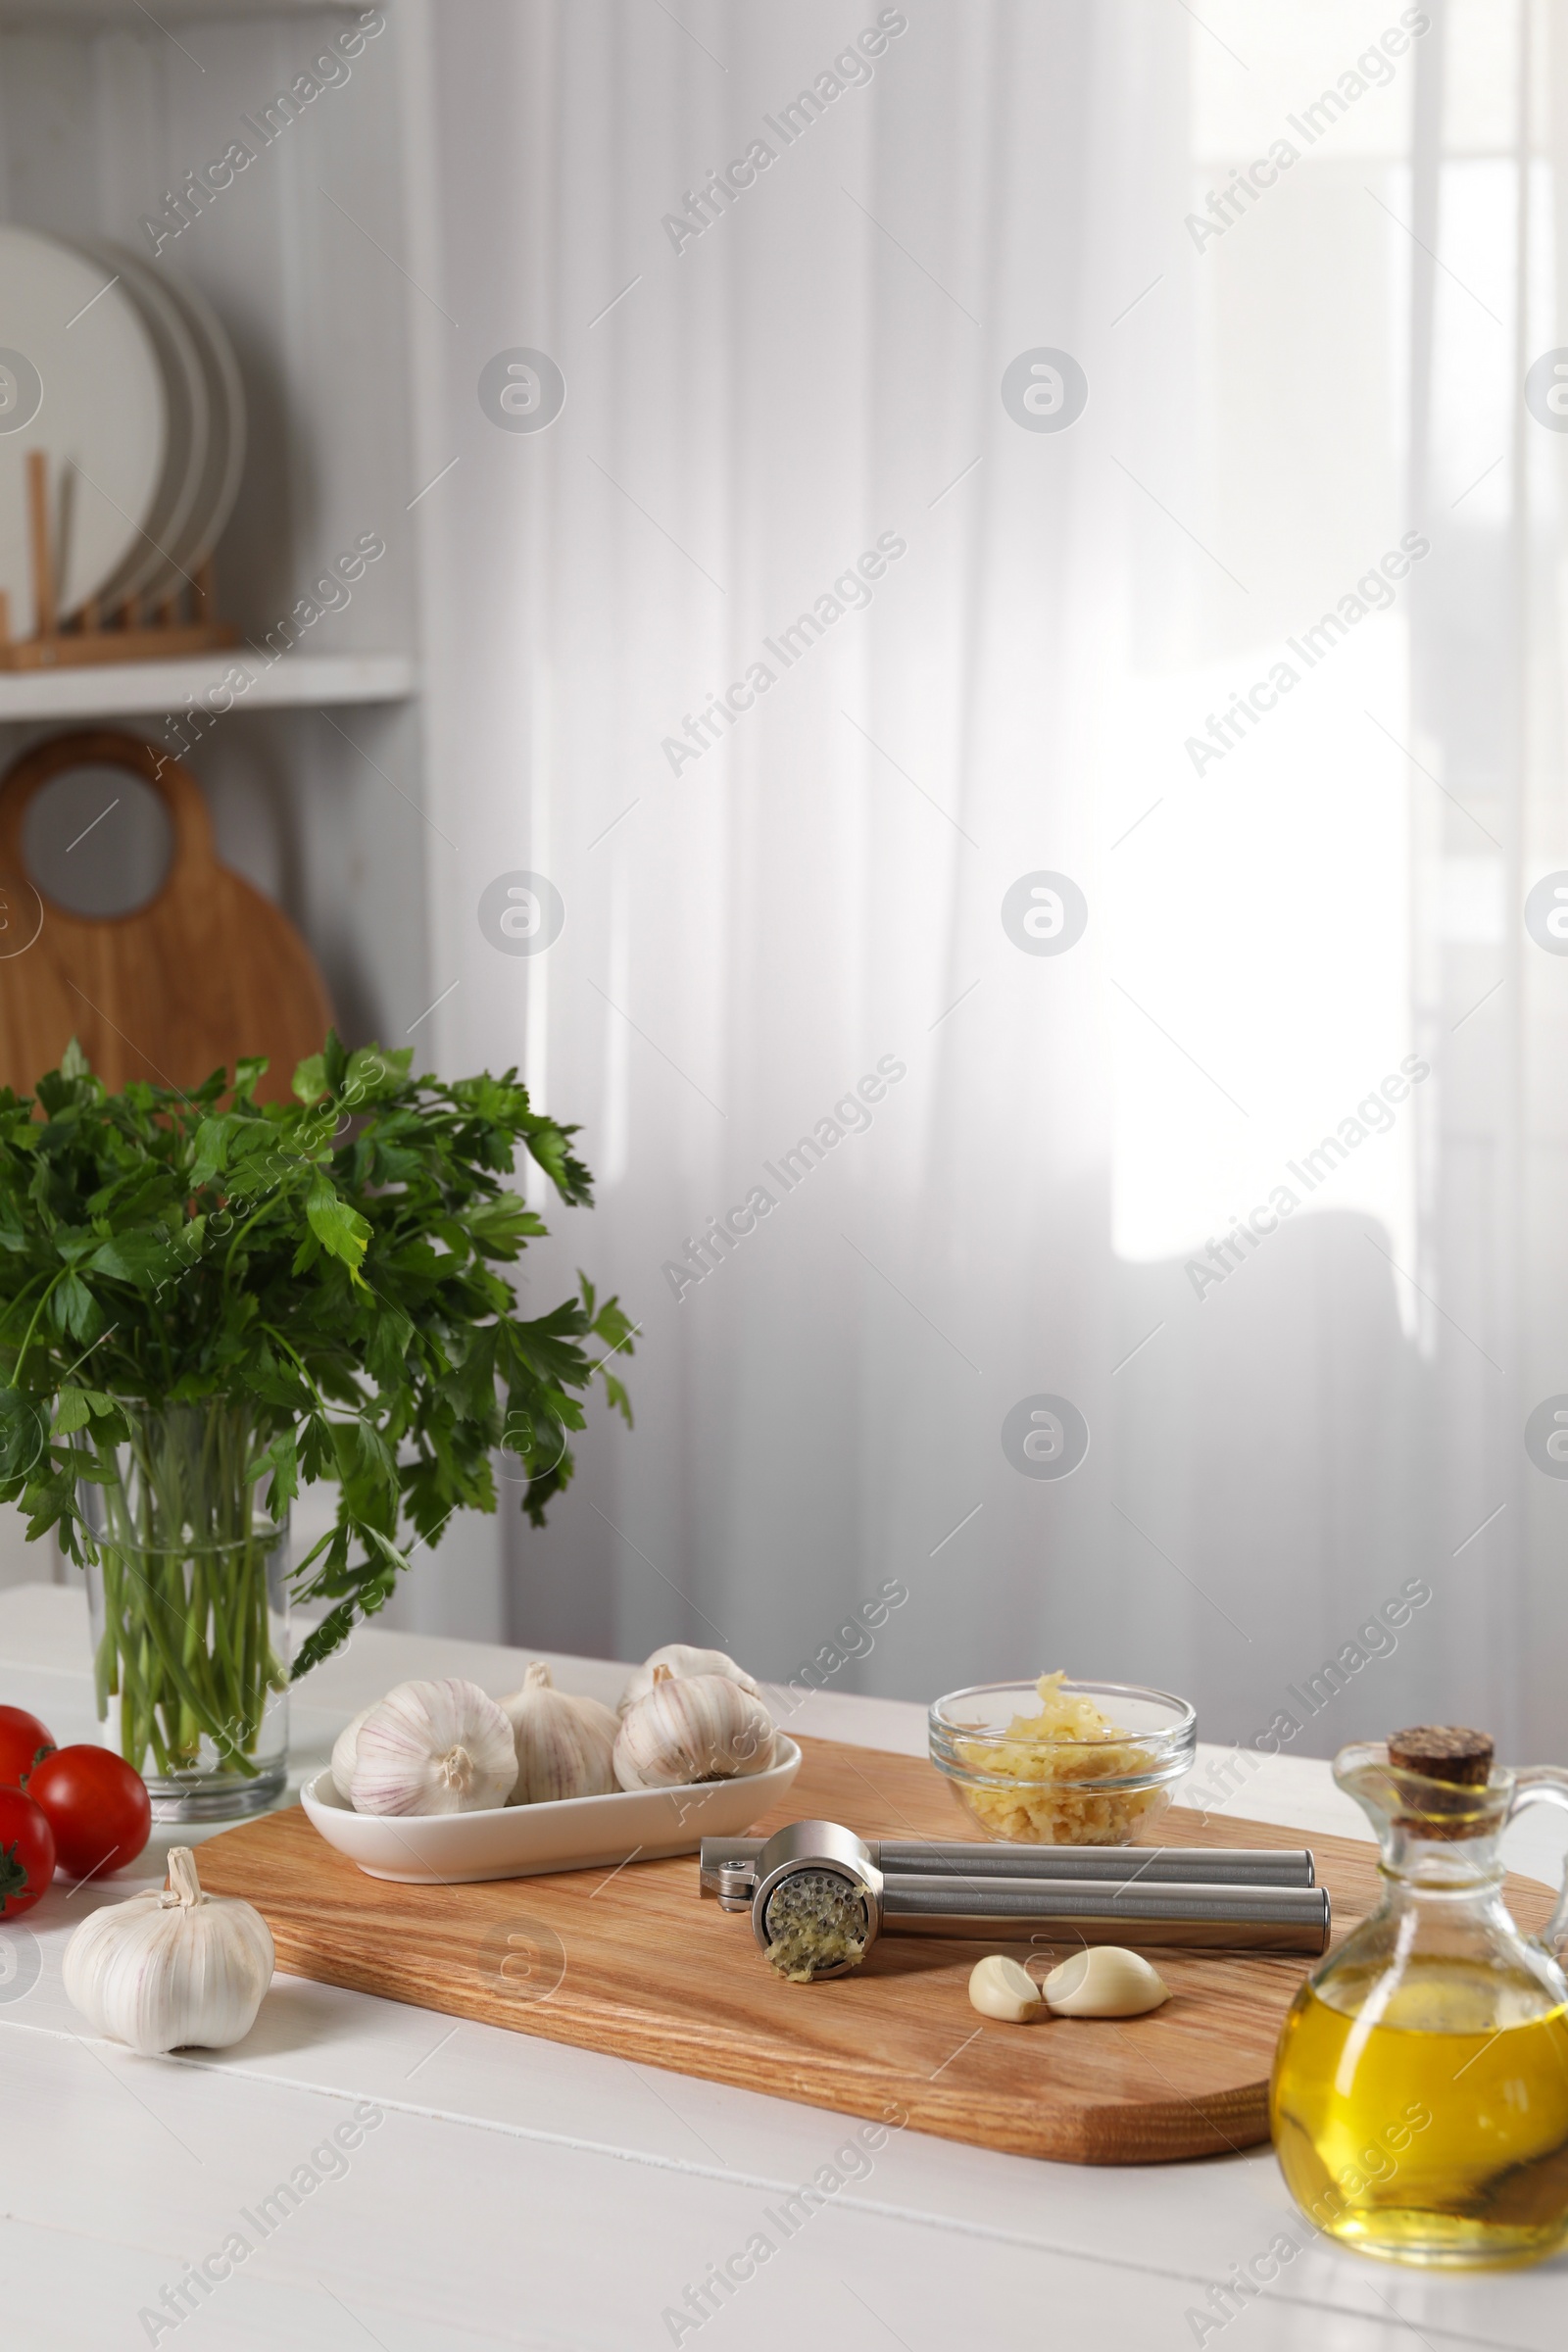 Photo of Garlic press and products on wooden table in kitchen